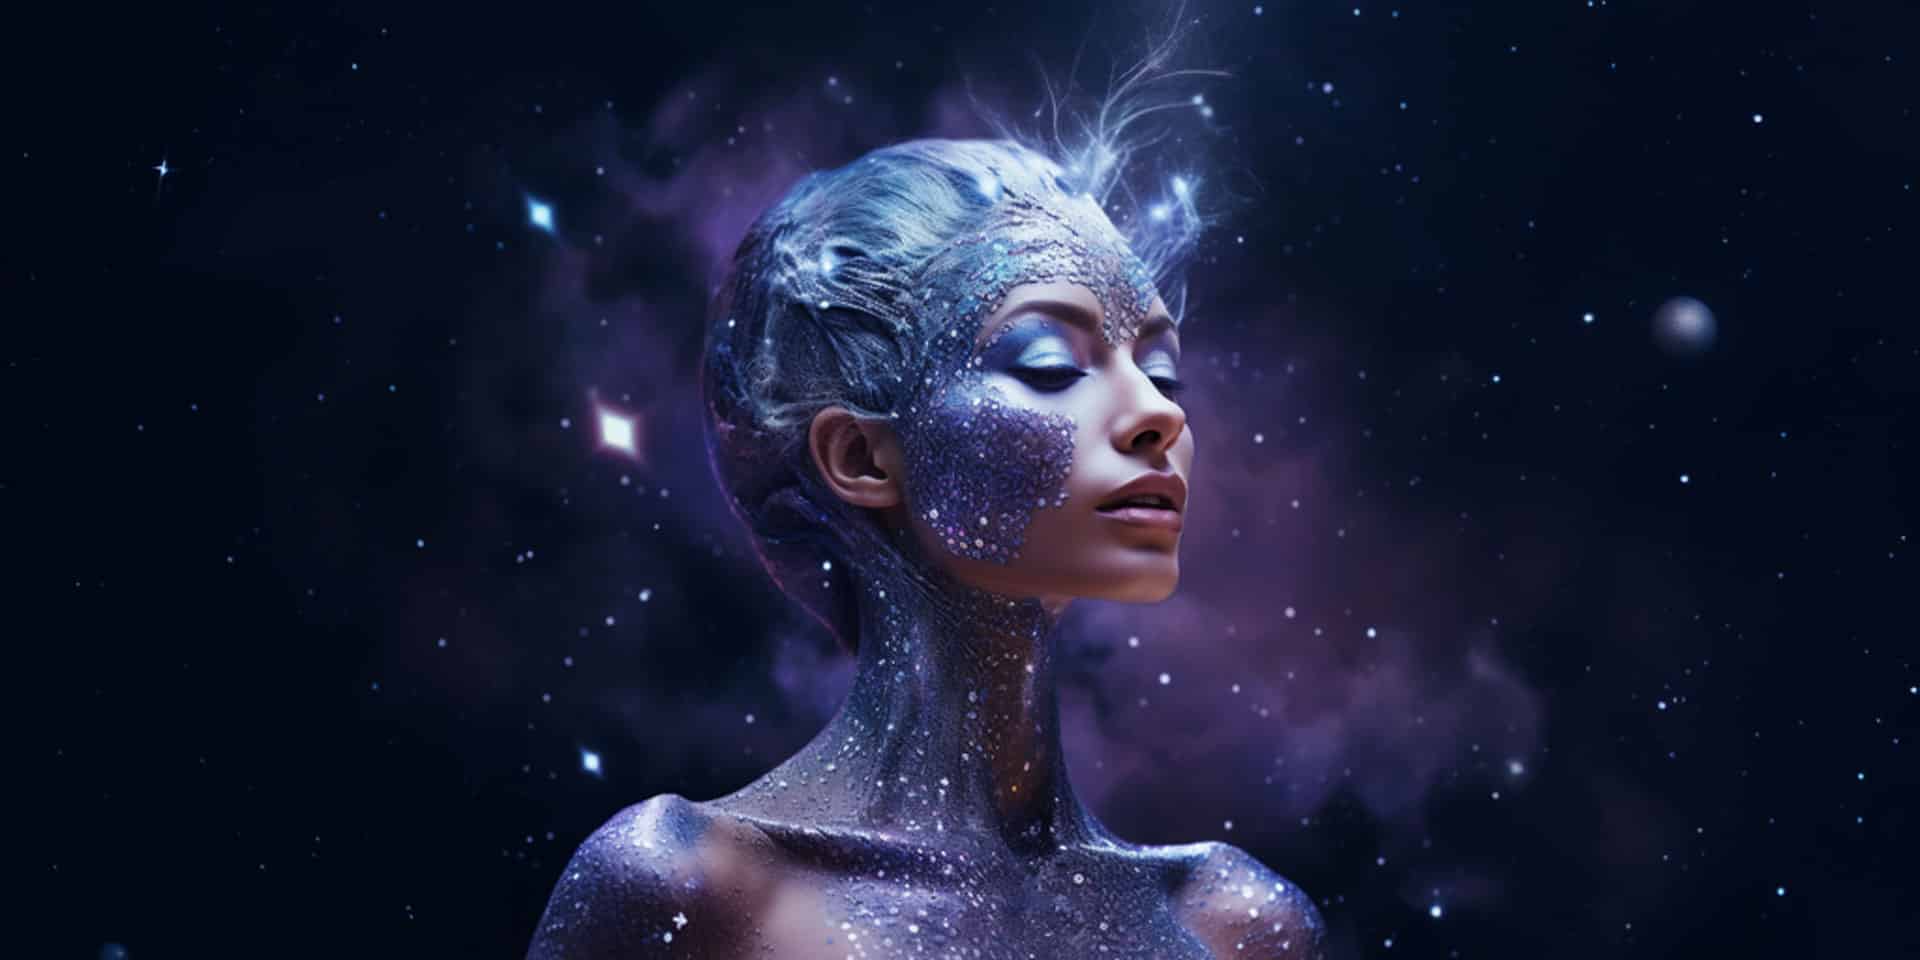 51 Huge Signs You’re A Starseed & Which Star System Are You From?